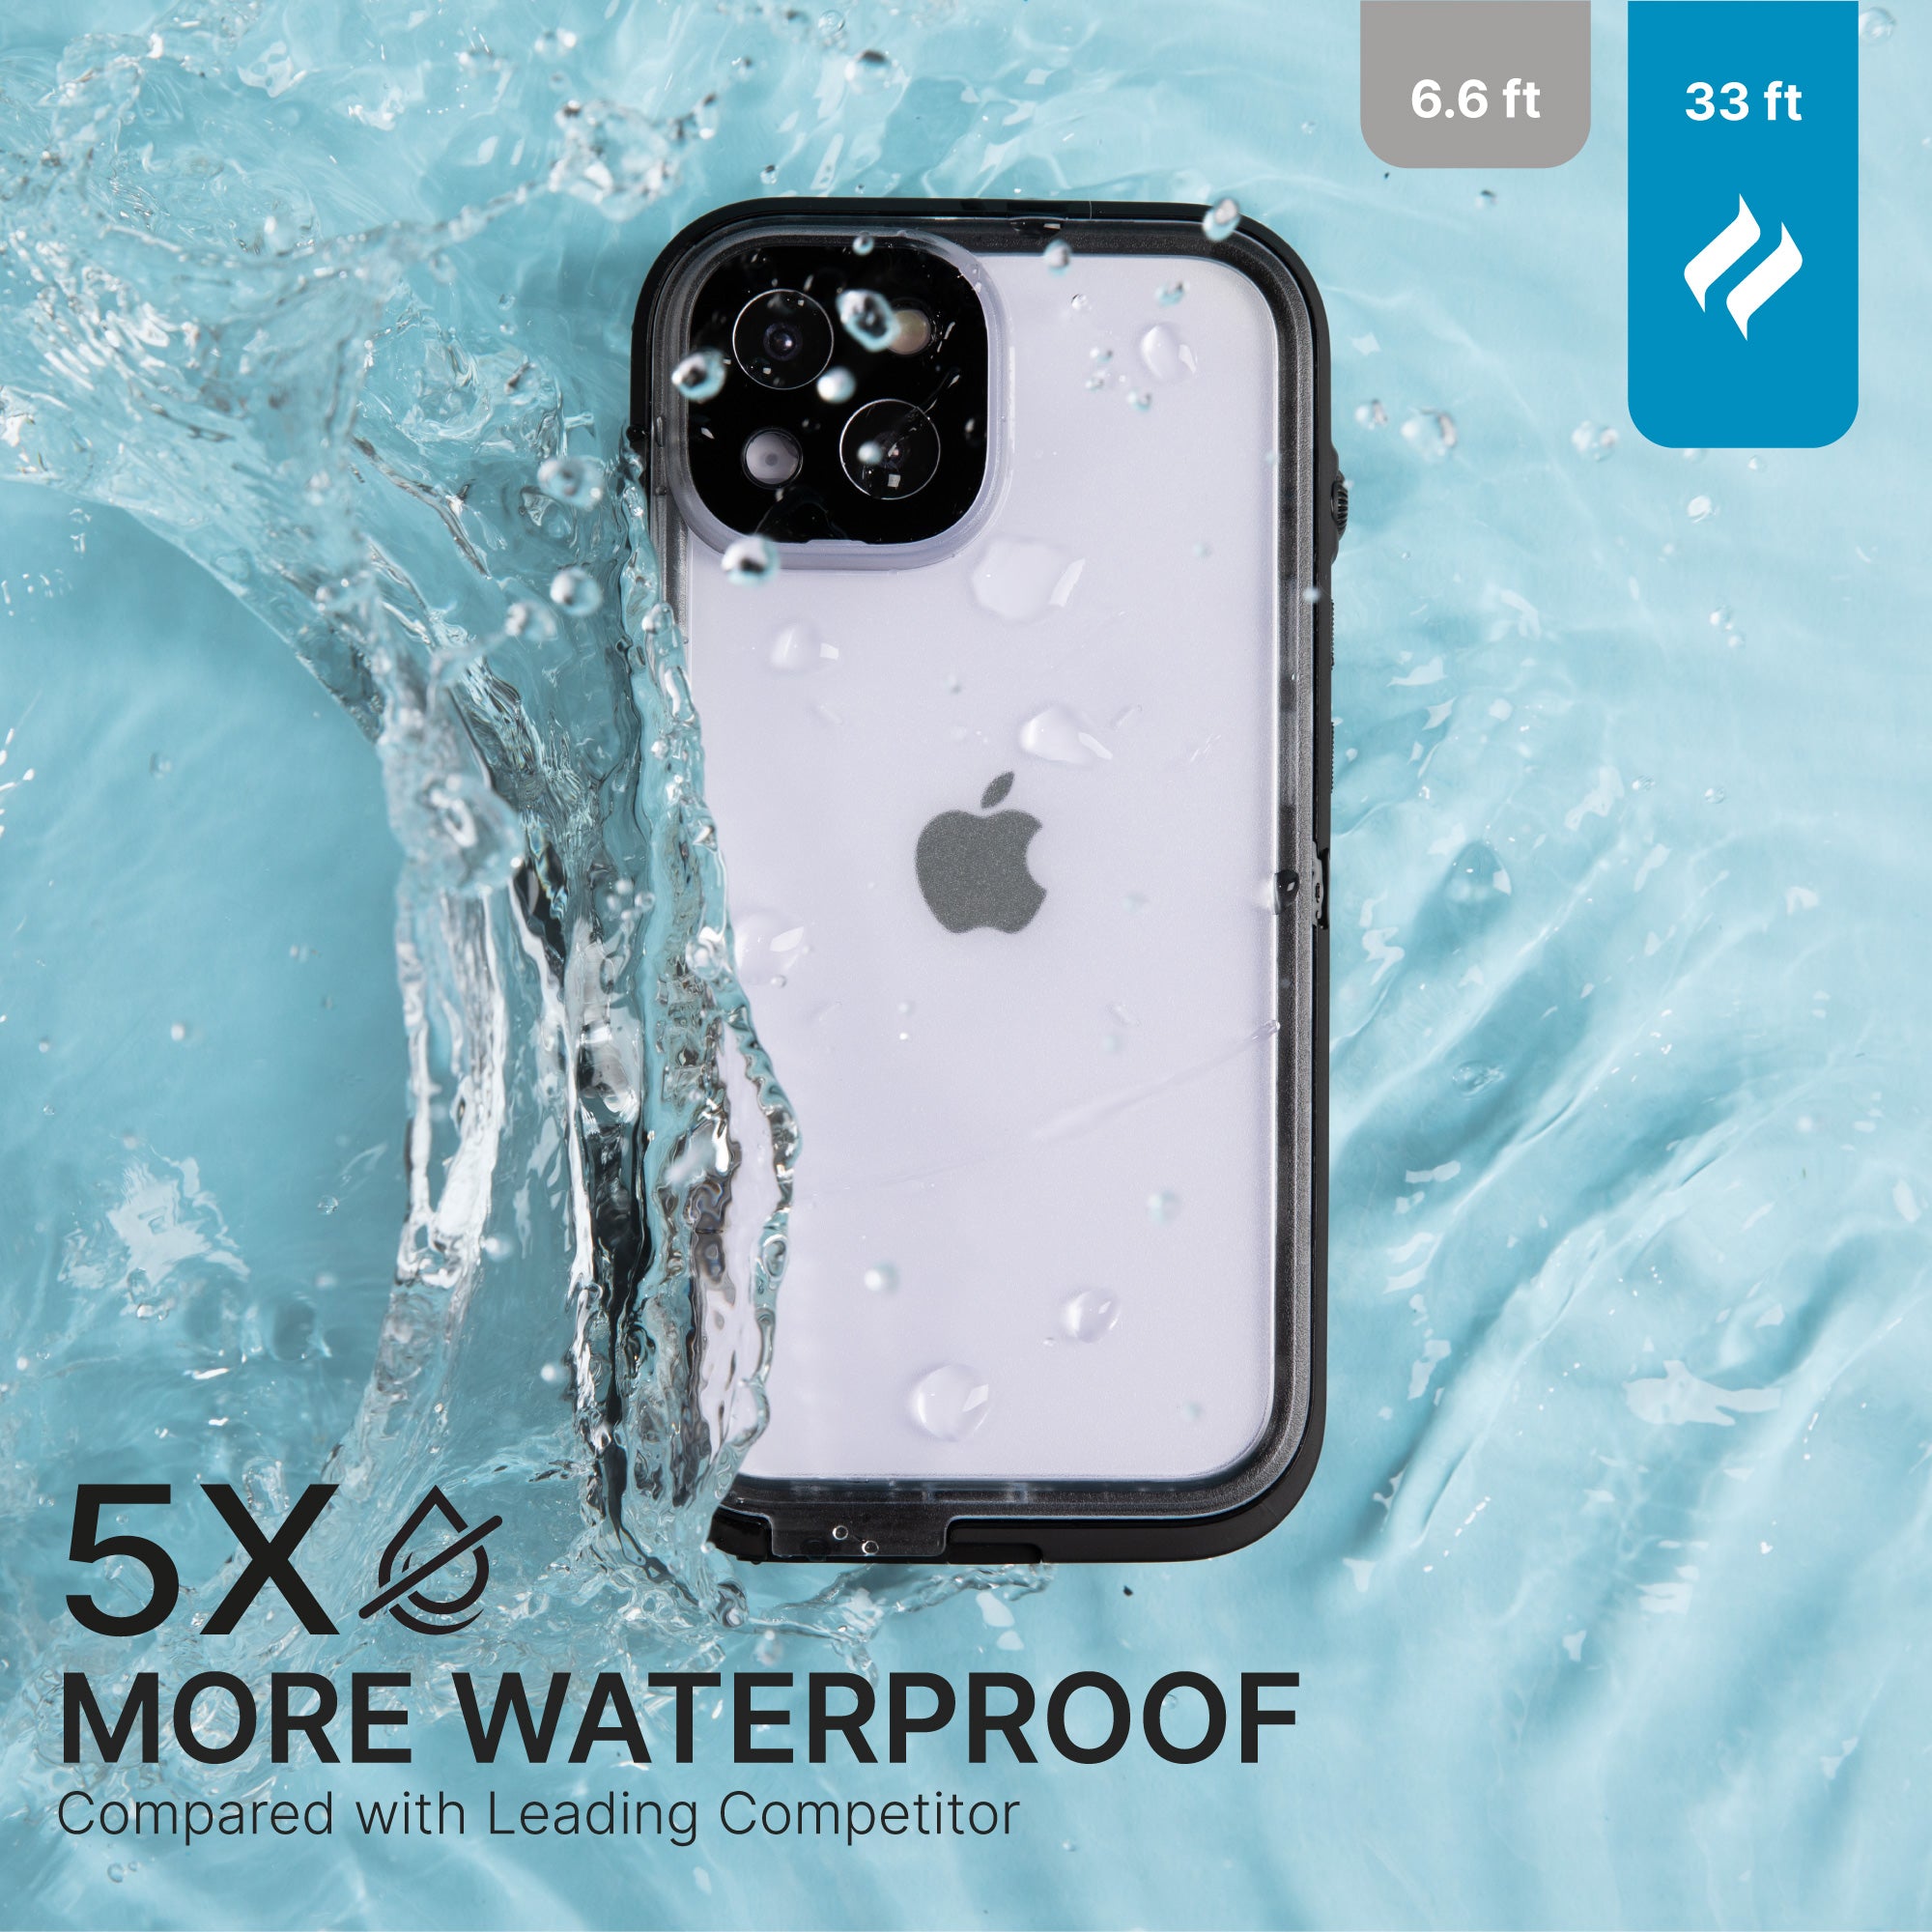 CATIPHO14BLKMP-FBA | Catalyst iPhone 14 Pro Waterproof Case Total Protection case splashed in water 5 times more waterproof